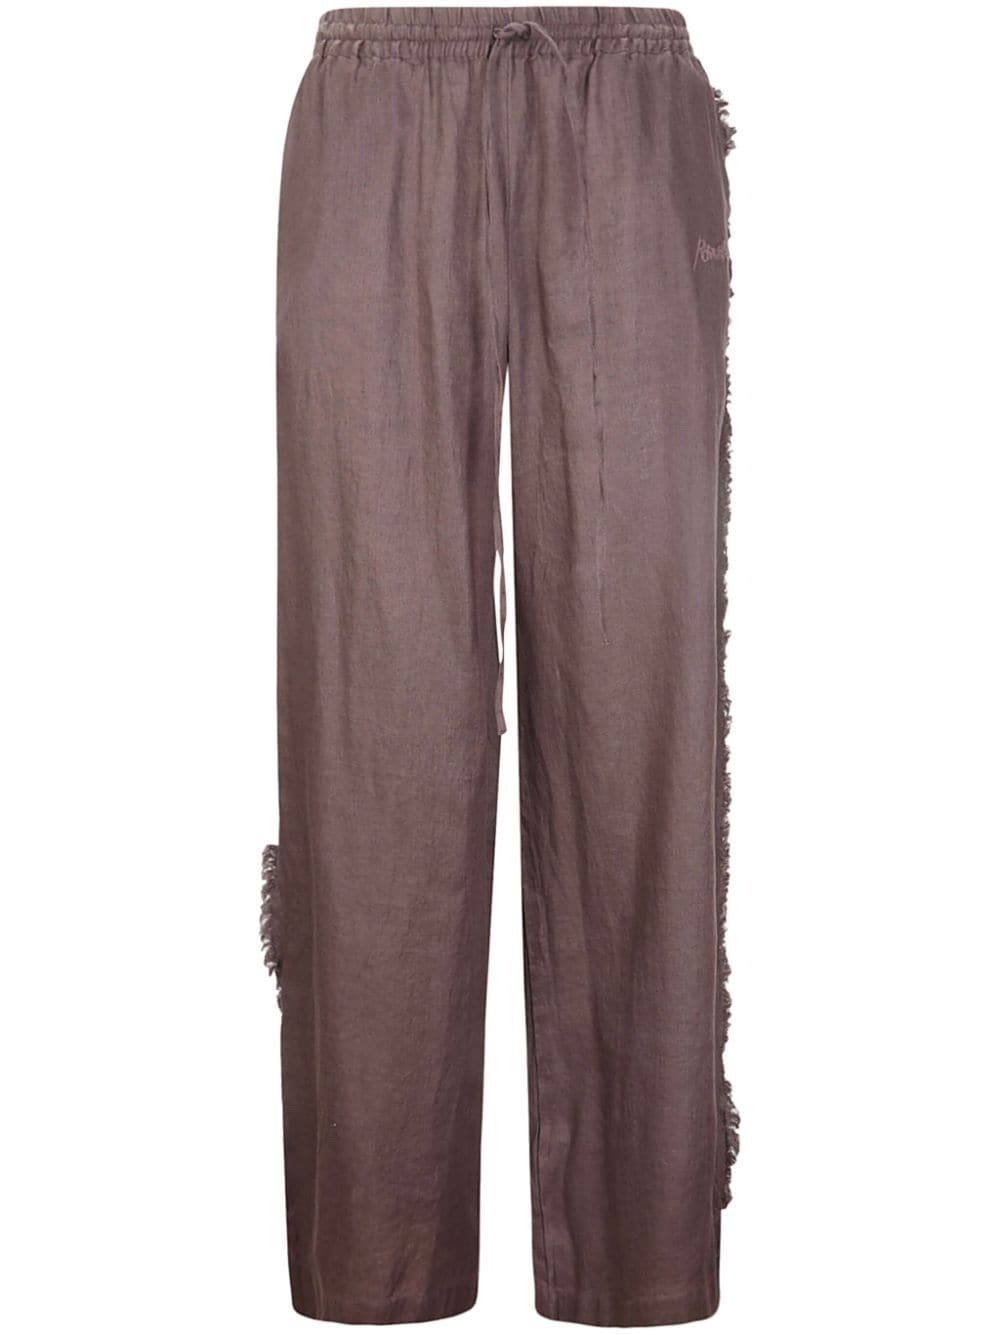 P.A.R.O.S.H. distressed-finish straight linen trousers - Marrone